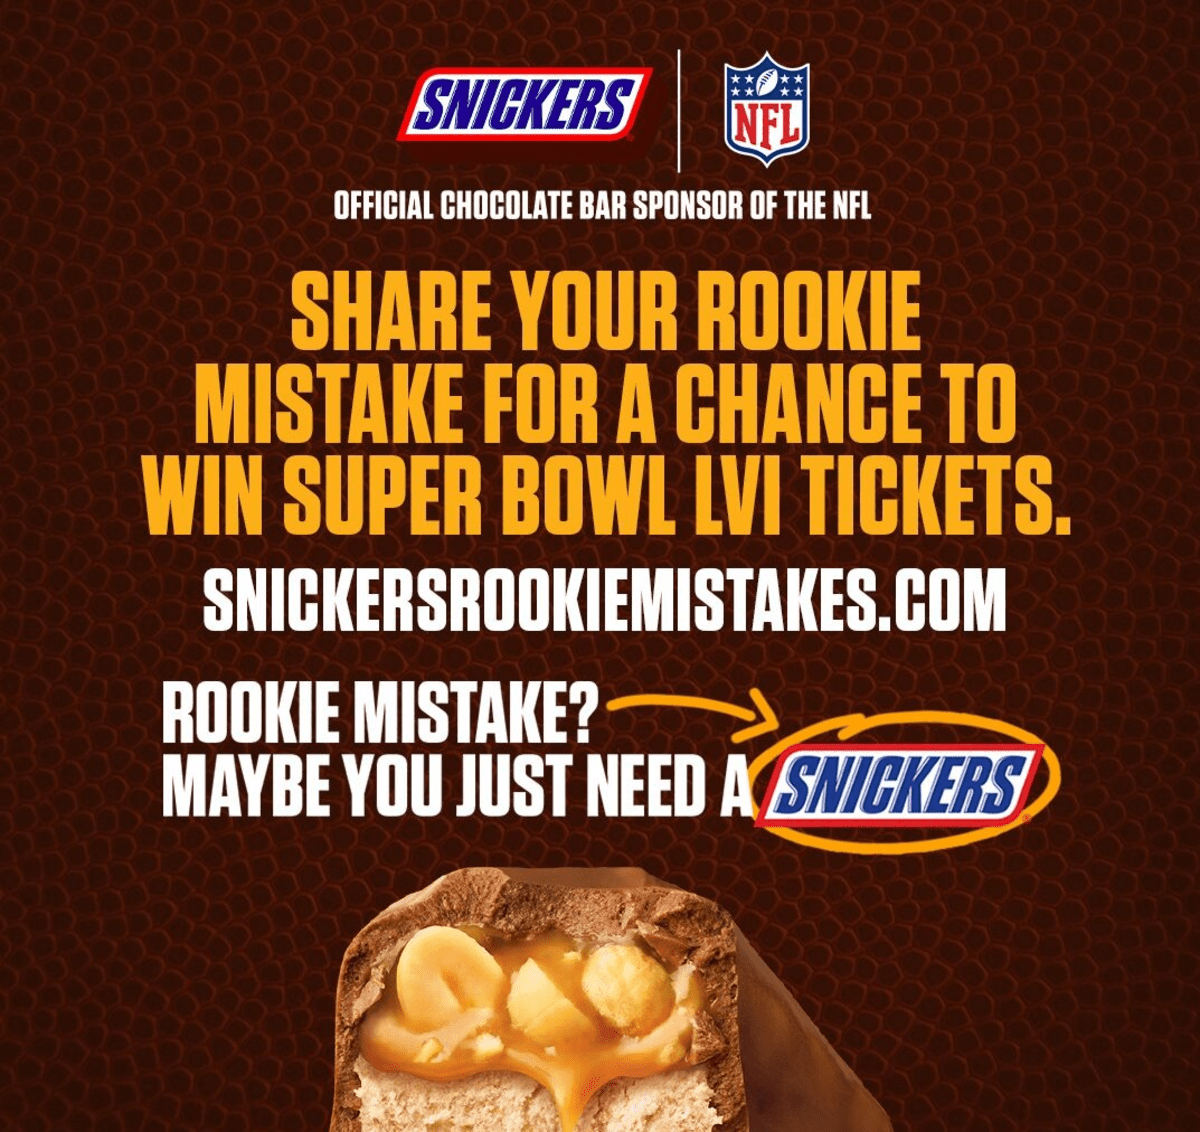 Rookie mistake campaign by Snickers